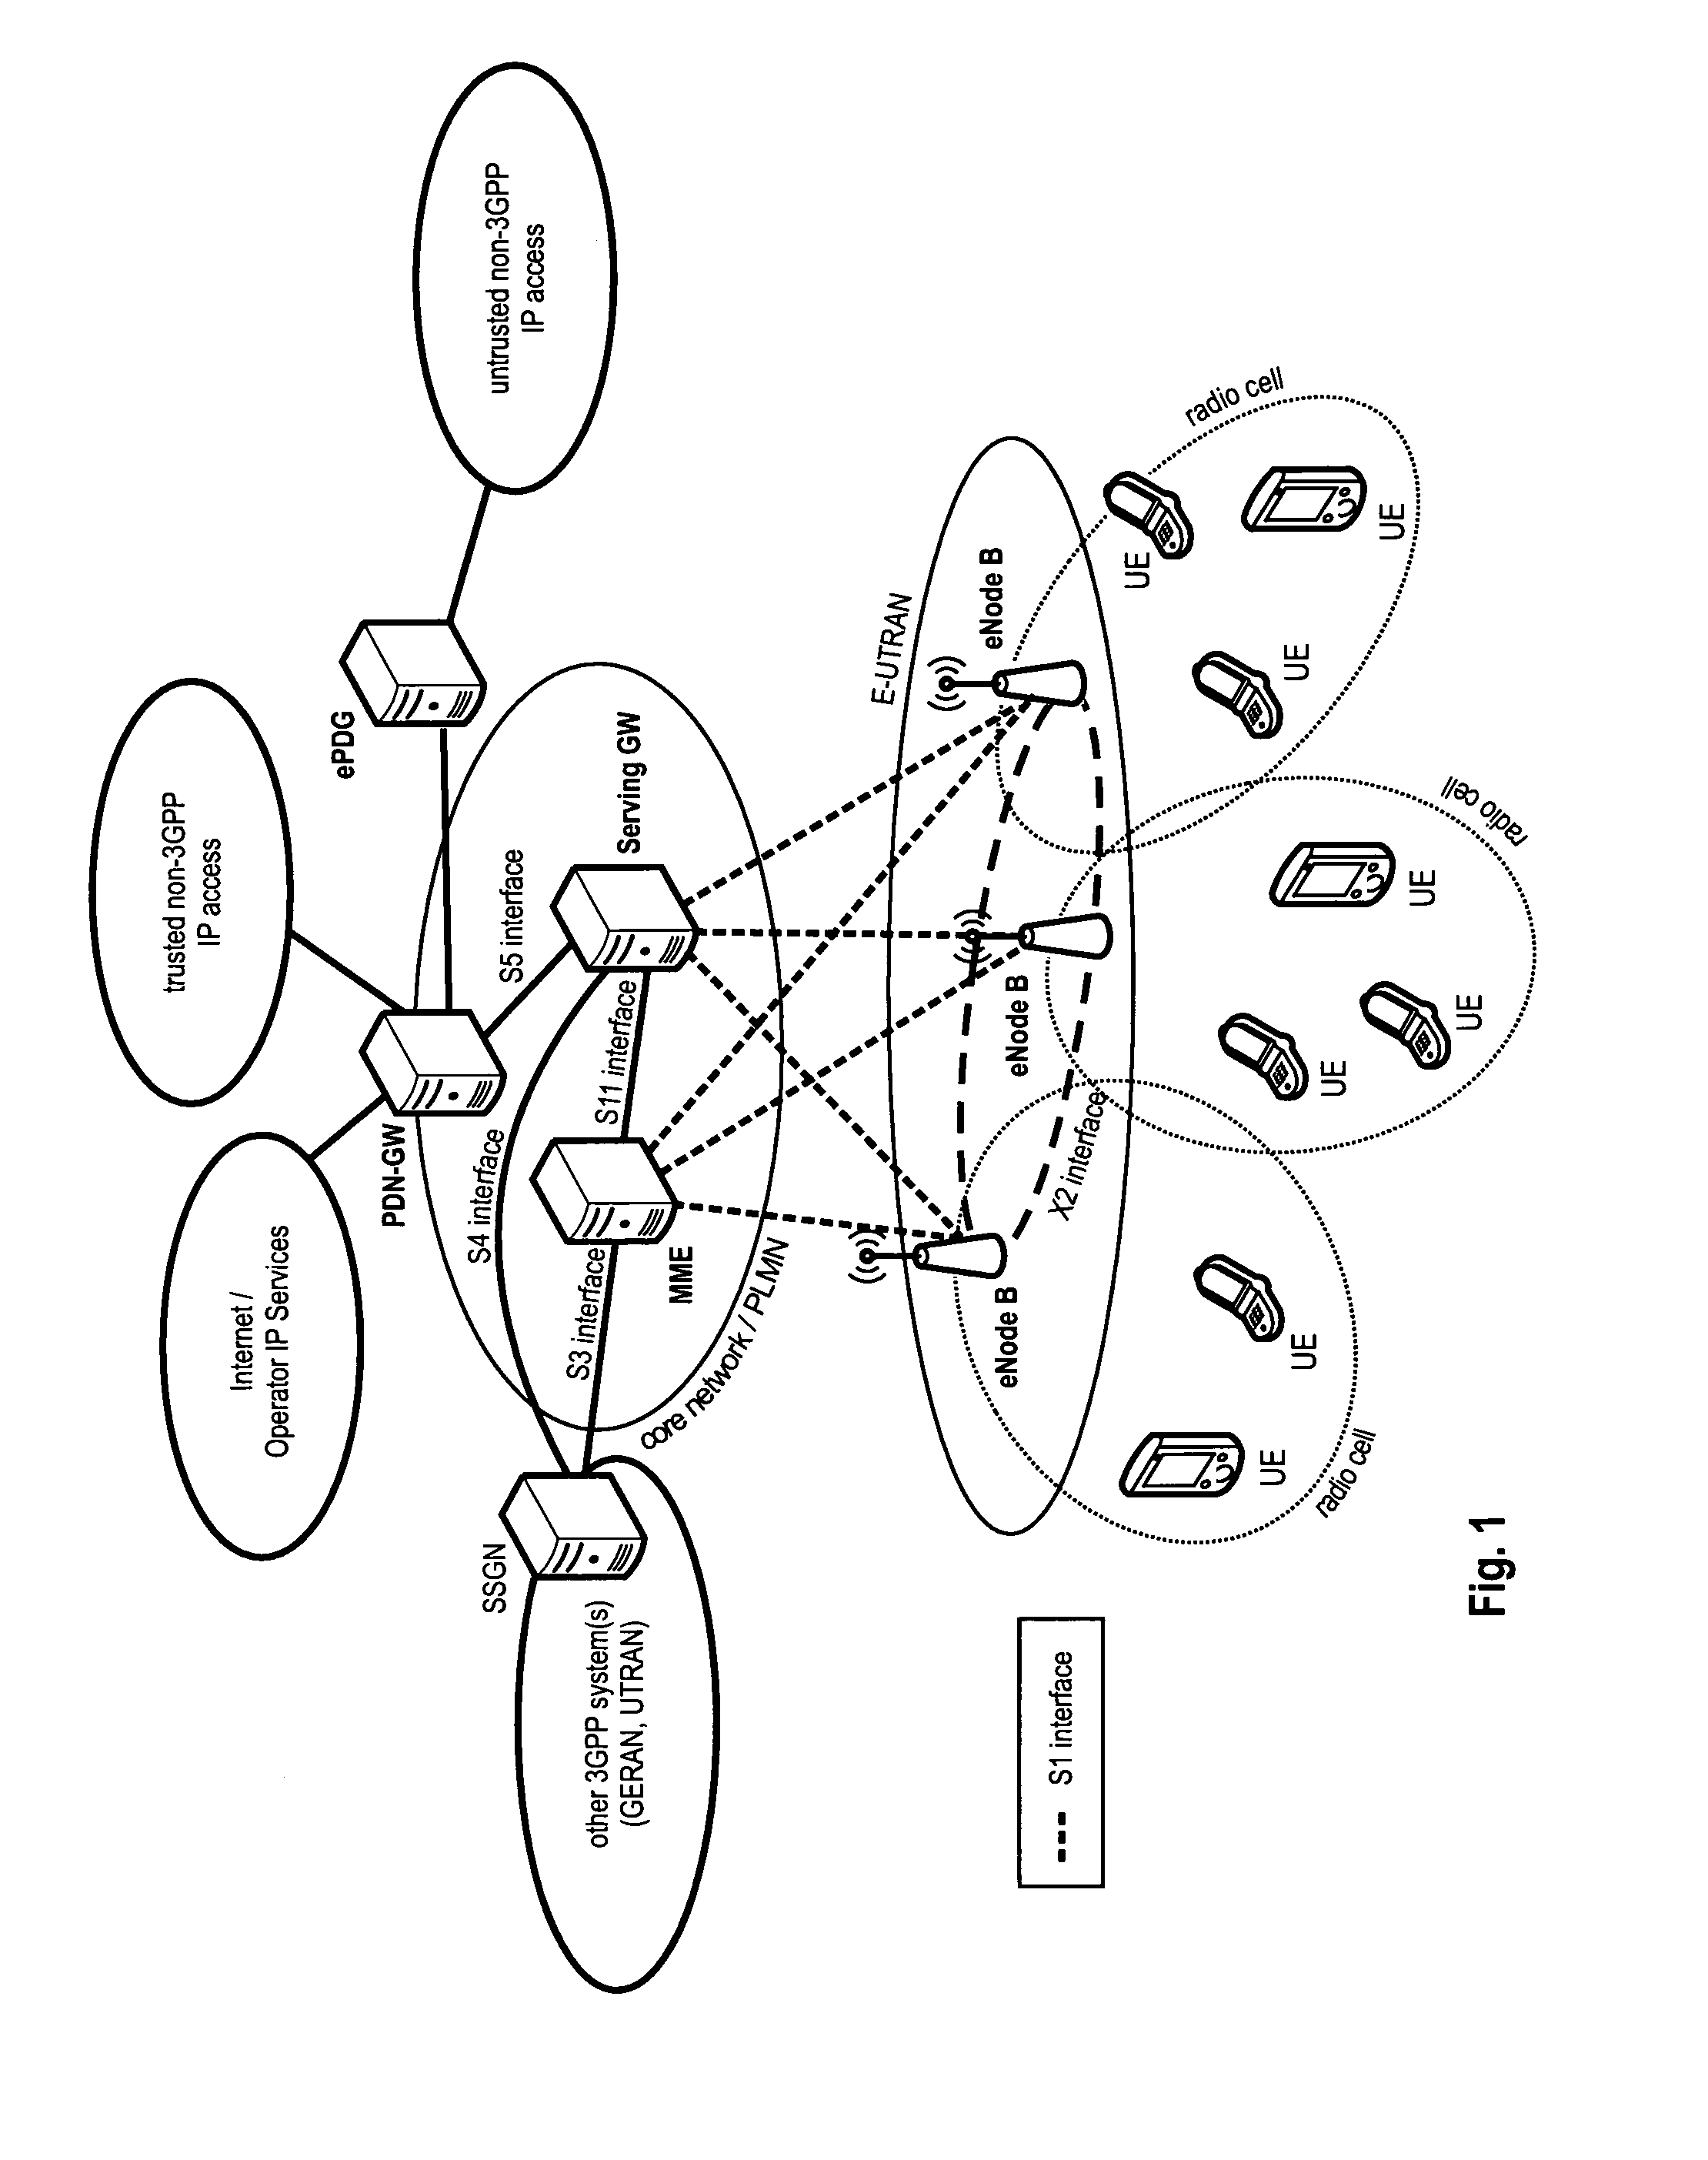 Secure tunnel establishment upon attachment or handover to an access network